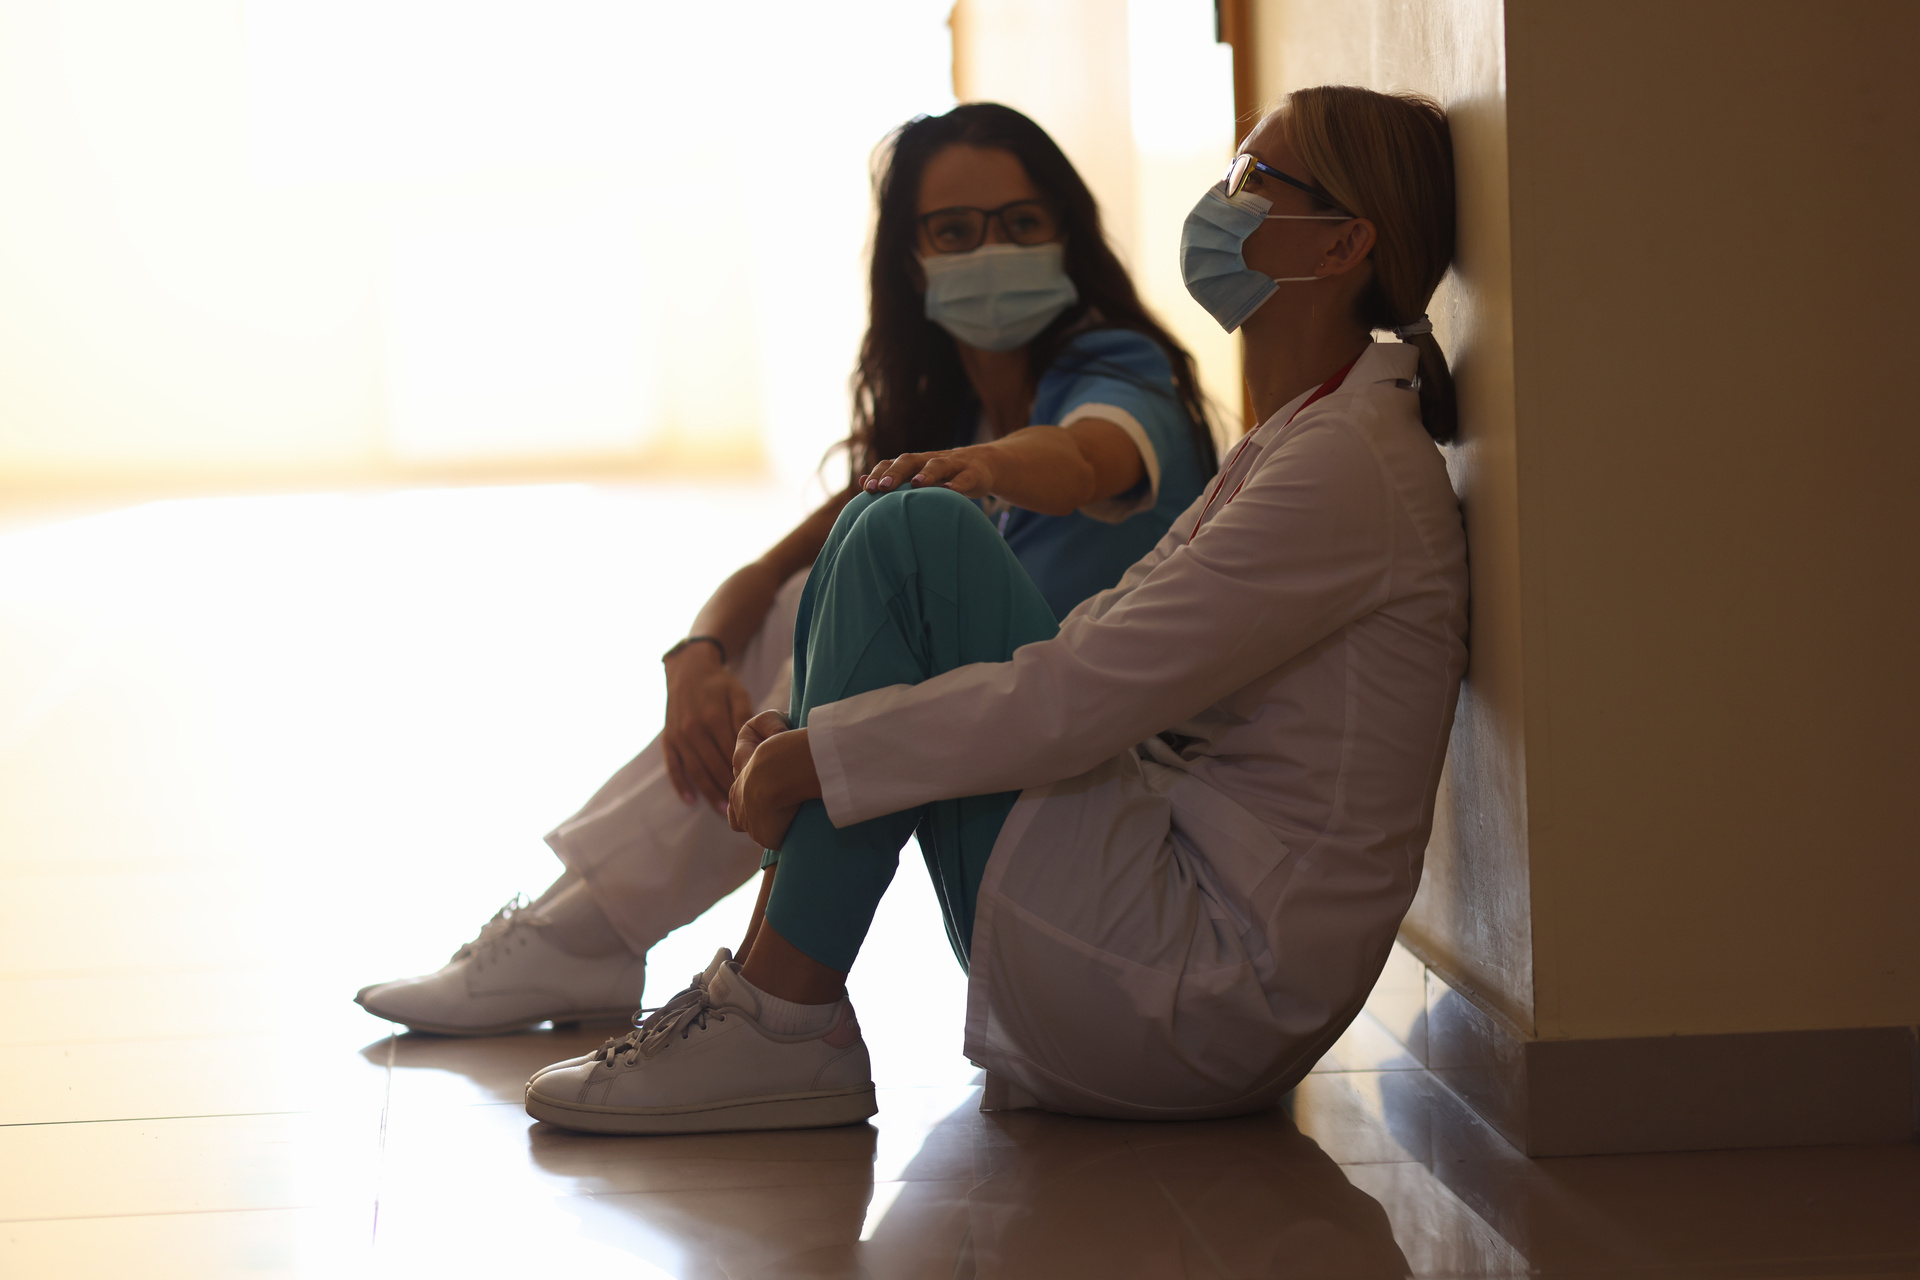 Nurse wearing face mask, slumped against wall in frustration; nurse colleague comforts her by placing hand on knee